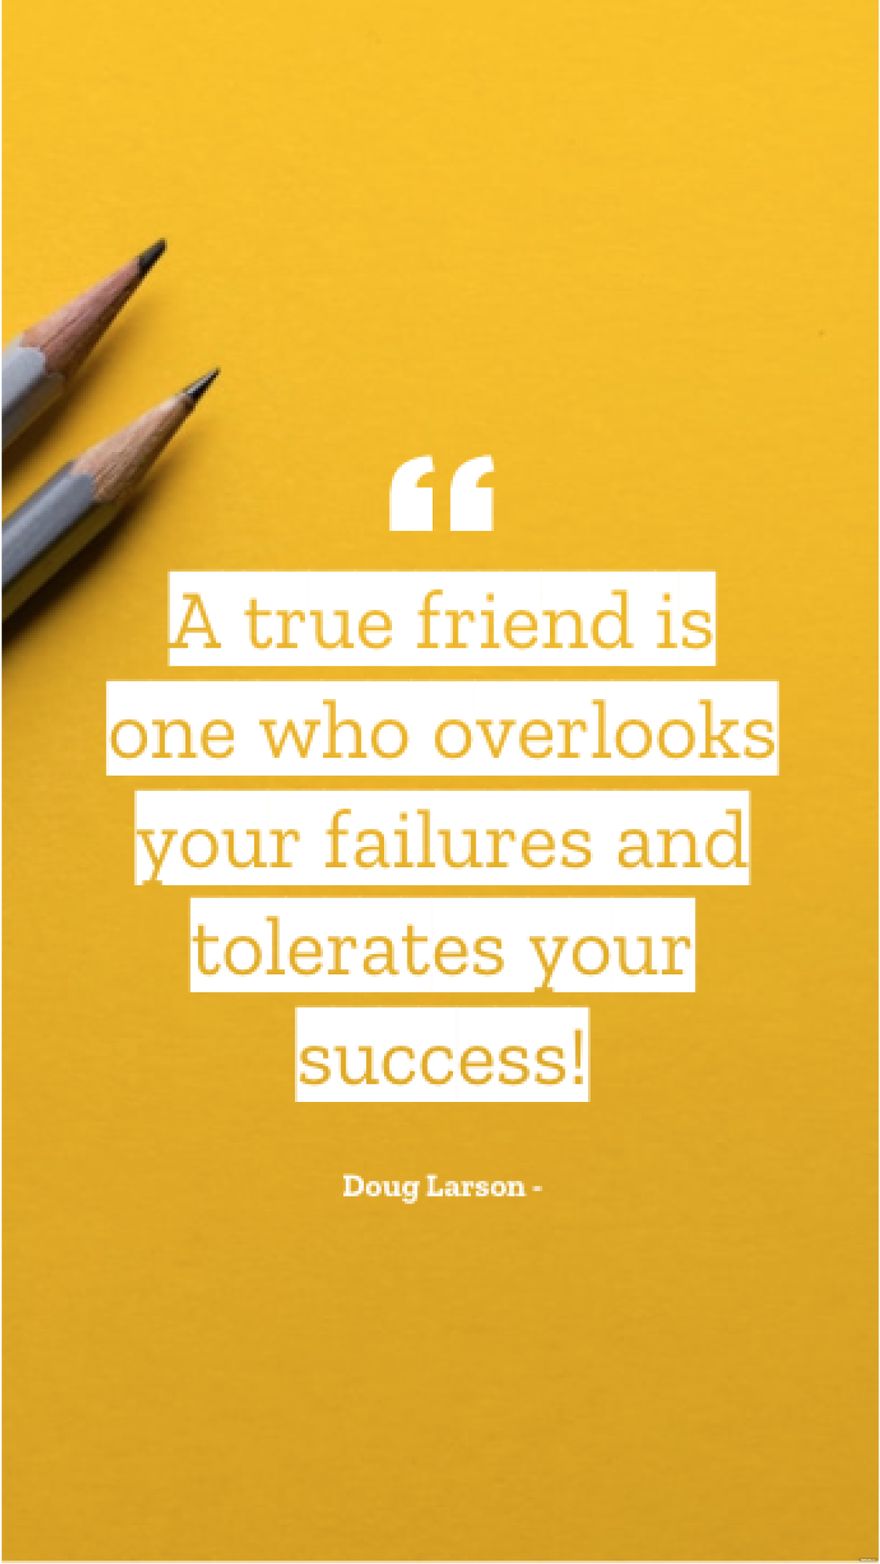 Doug Larson - A true friend is one who overlooks your failures and tolerates your success!